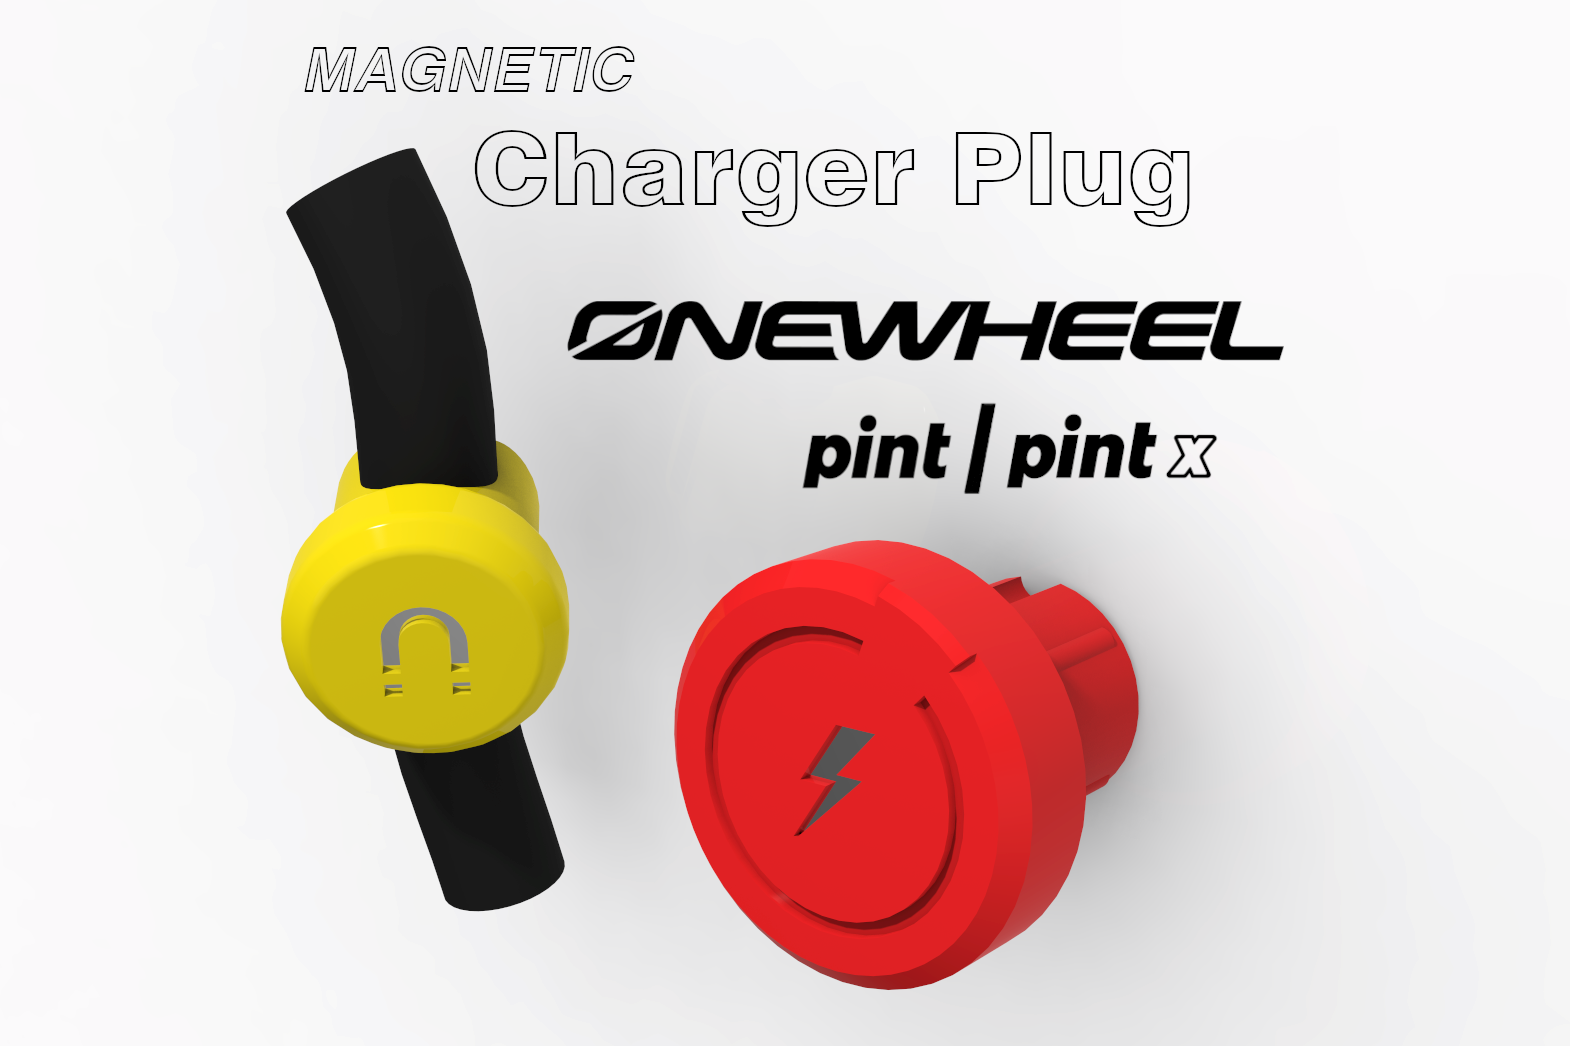 MAGNETIC Charger Plug for Onewheel Pint / Pint X